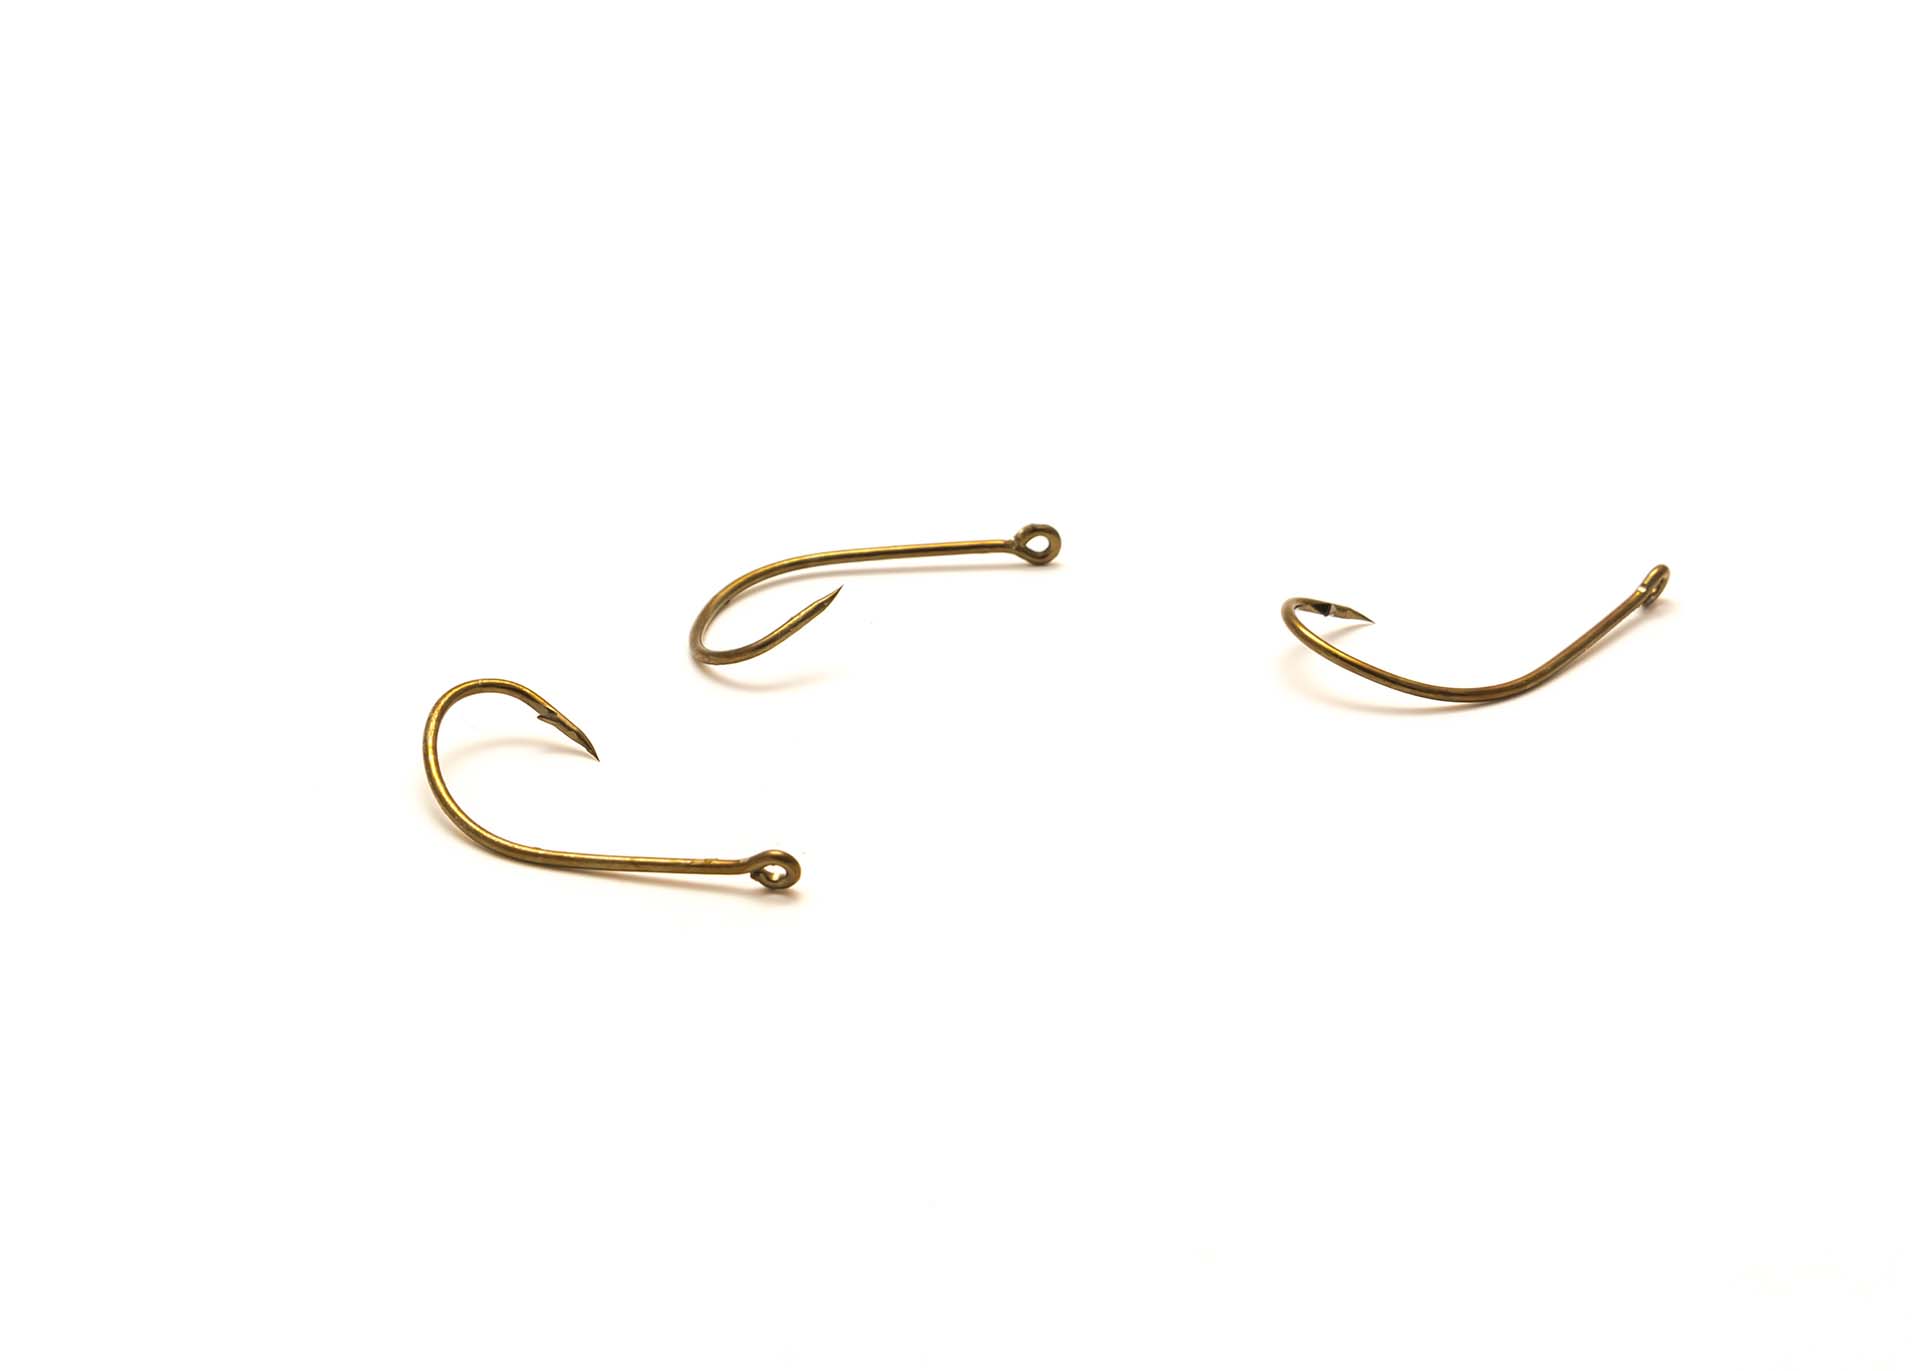 Mix of classic fishing j hooks with offset for catfishing catch isolated on white background. Fishing gear tackle accessory with clipping path and copy space.